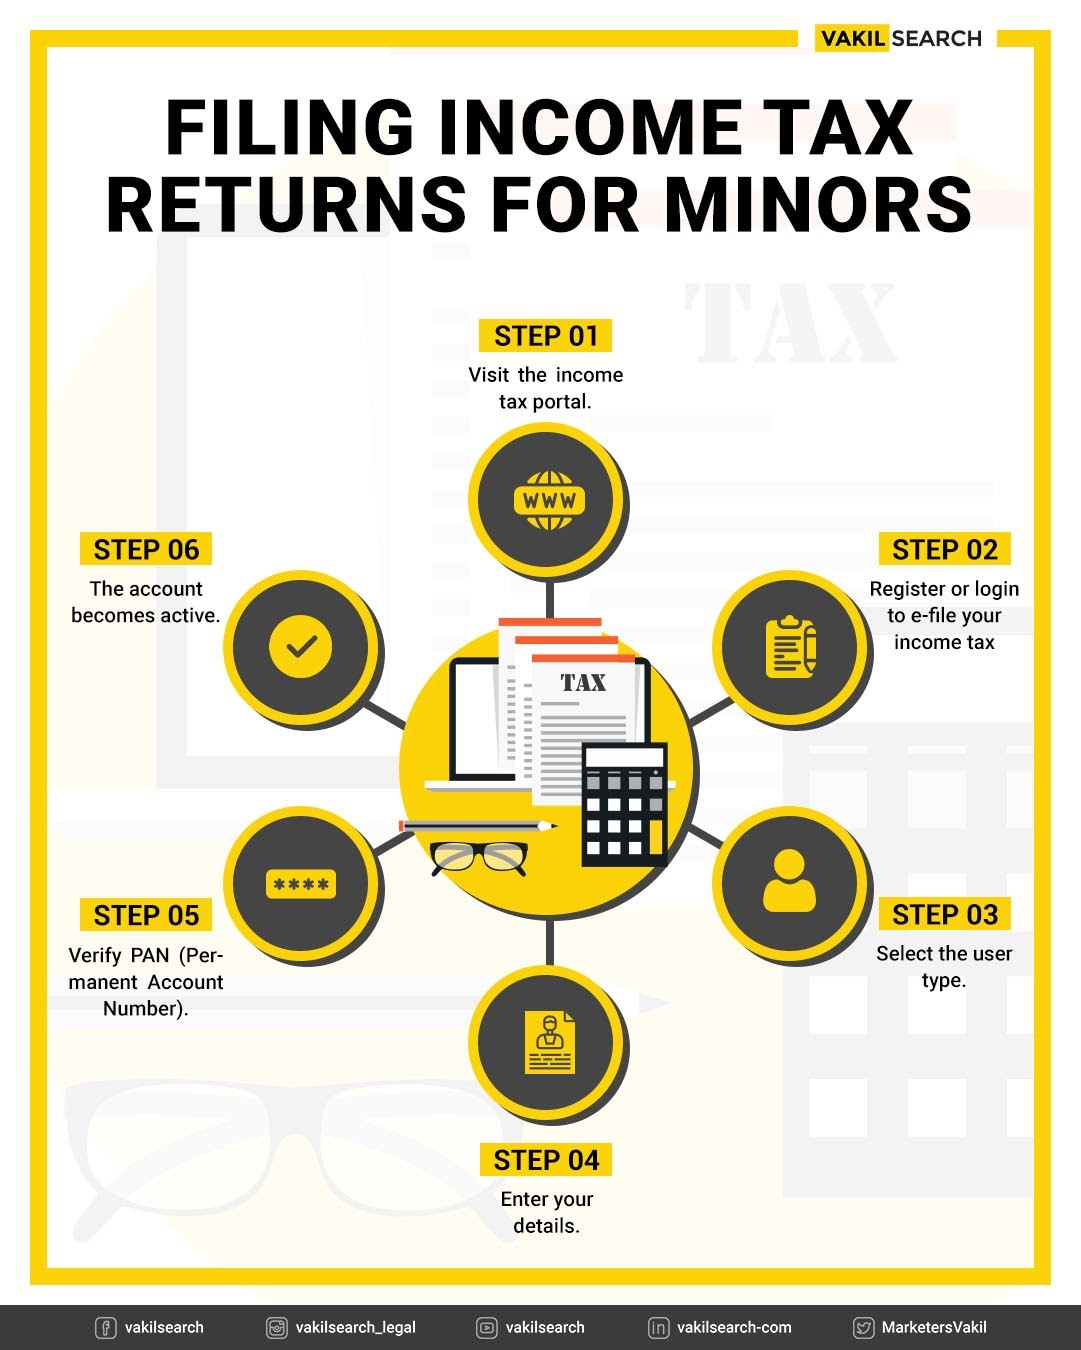 ITR for minor - taxation